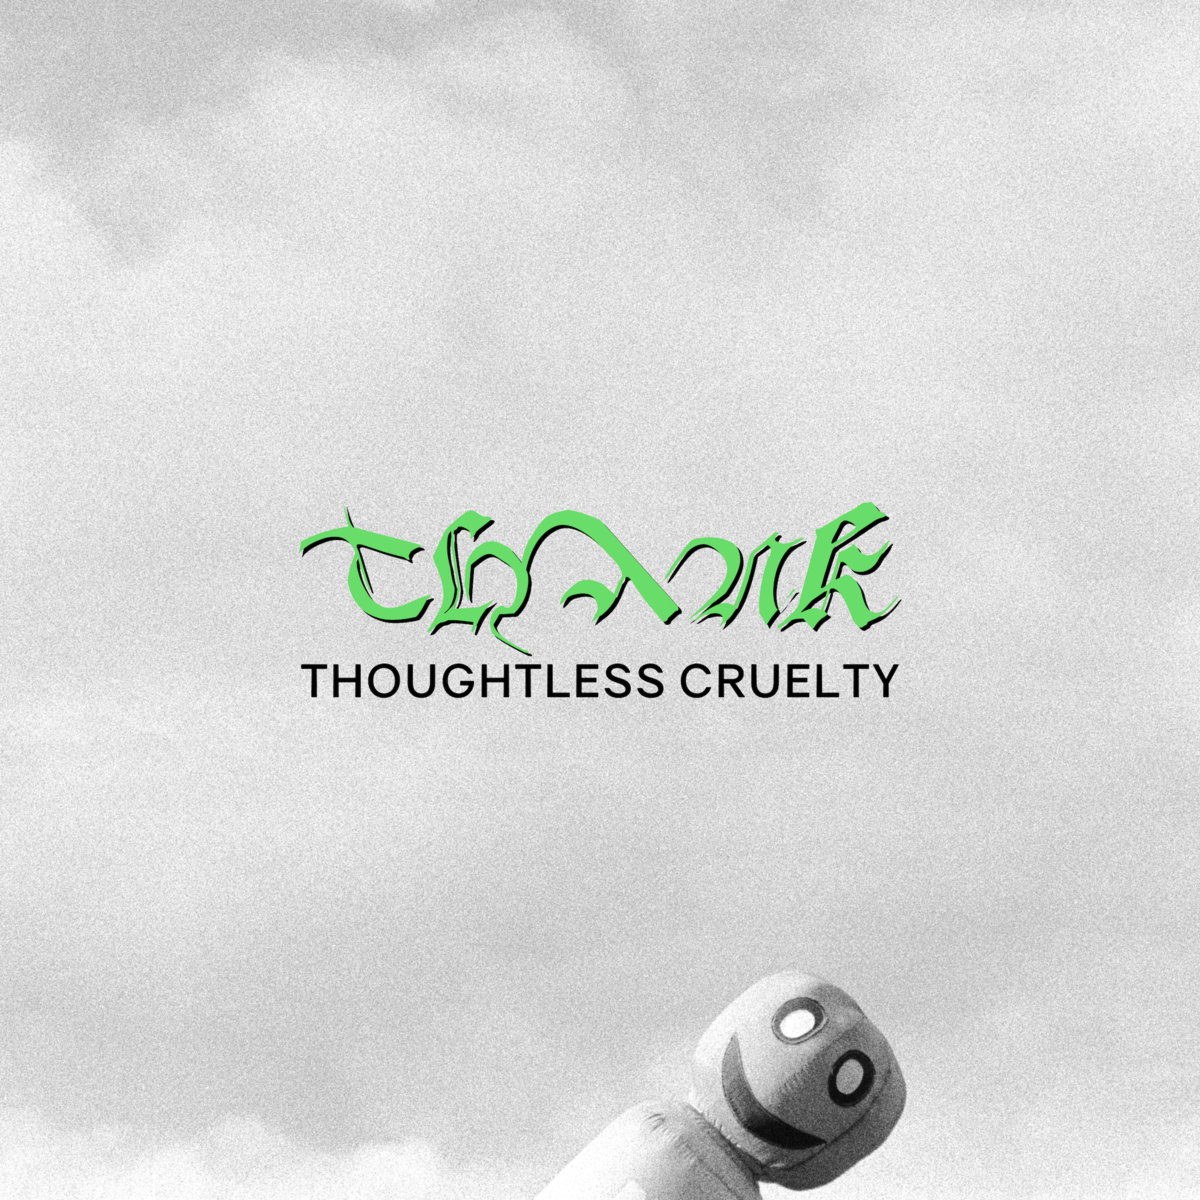 Thank — Thoughtless Cruelty